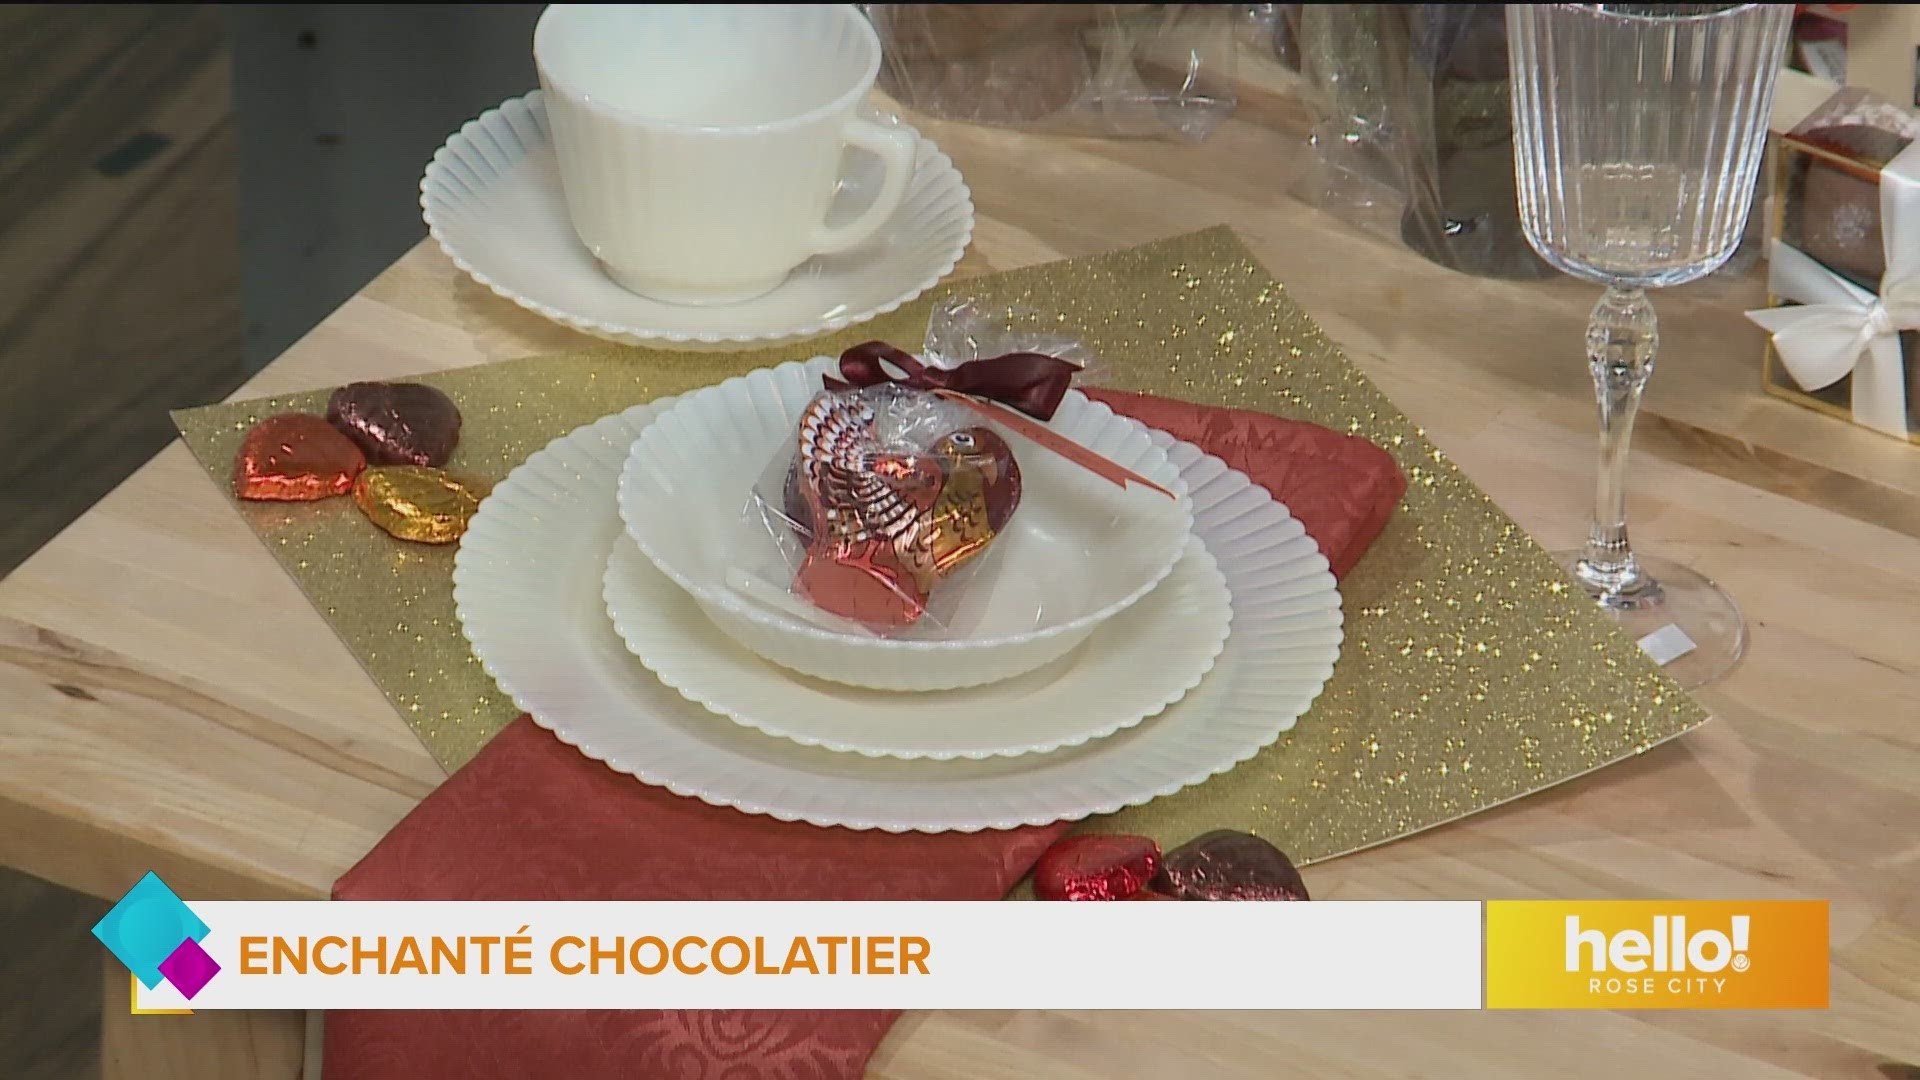 From chocolate charcuterie boards to table treats and holiday gifts, Enchanté Chocolatier has it all